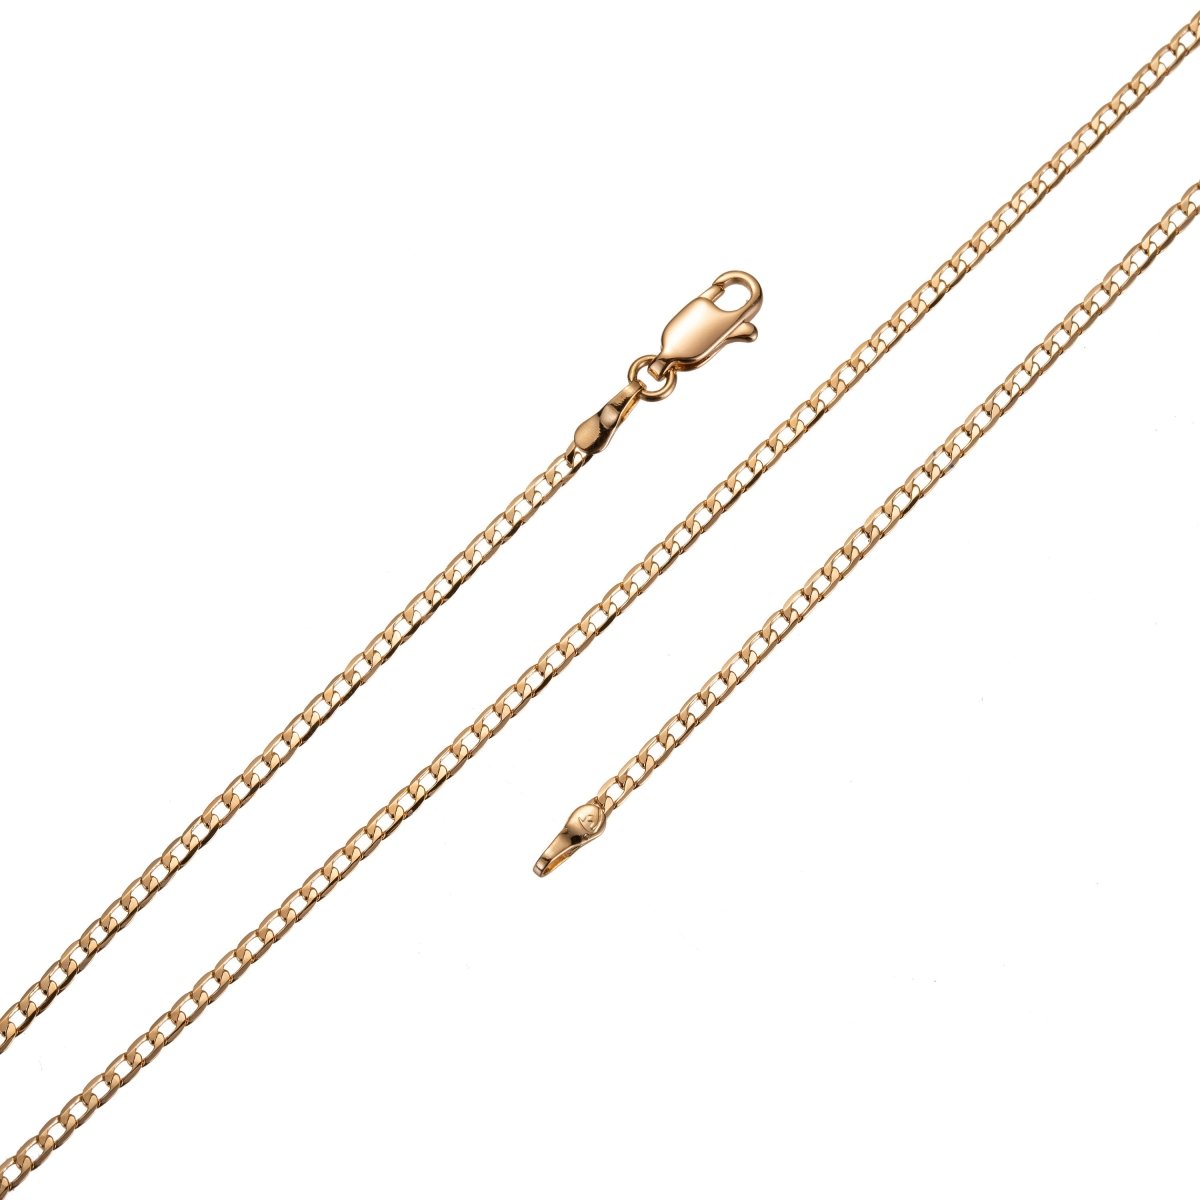 18K Gold Filled 2 mm Curb Chain Necklace Gold Filled Finished Statement Chain Necklace Ready to Wear 17.7 Inch Gold Chain w/ Lobster Claw | CN-680 Clearance Pricing - DLUXCA